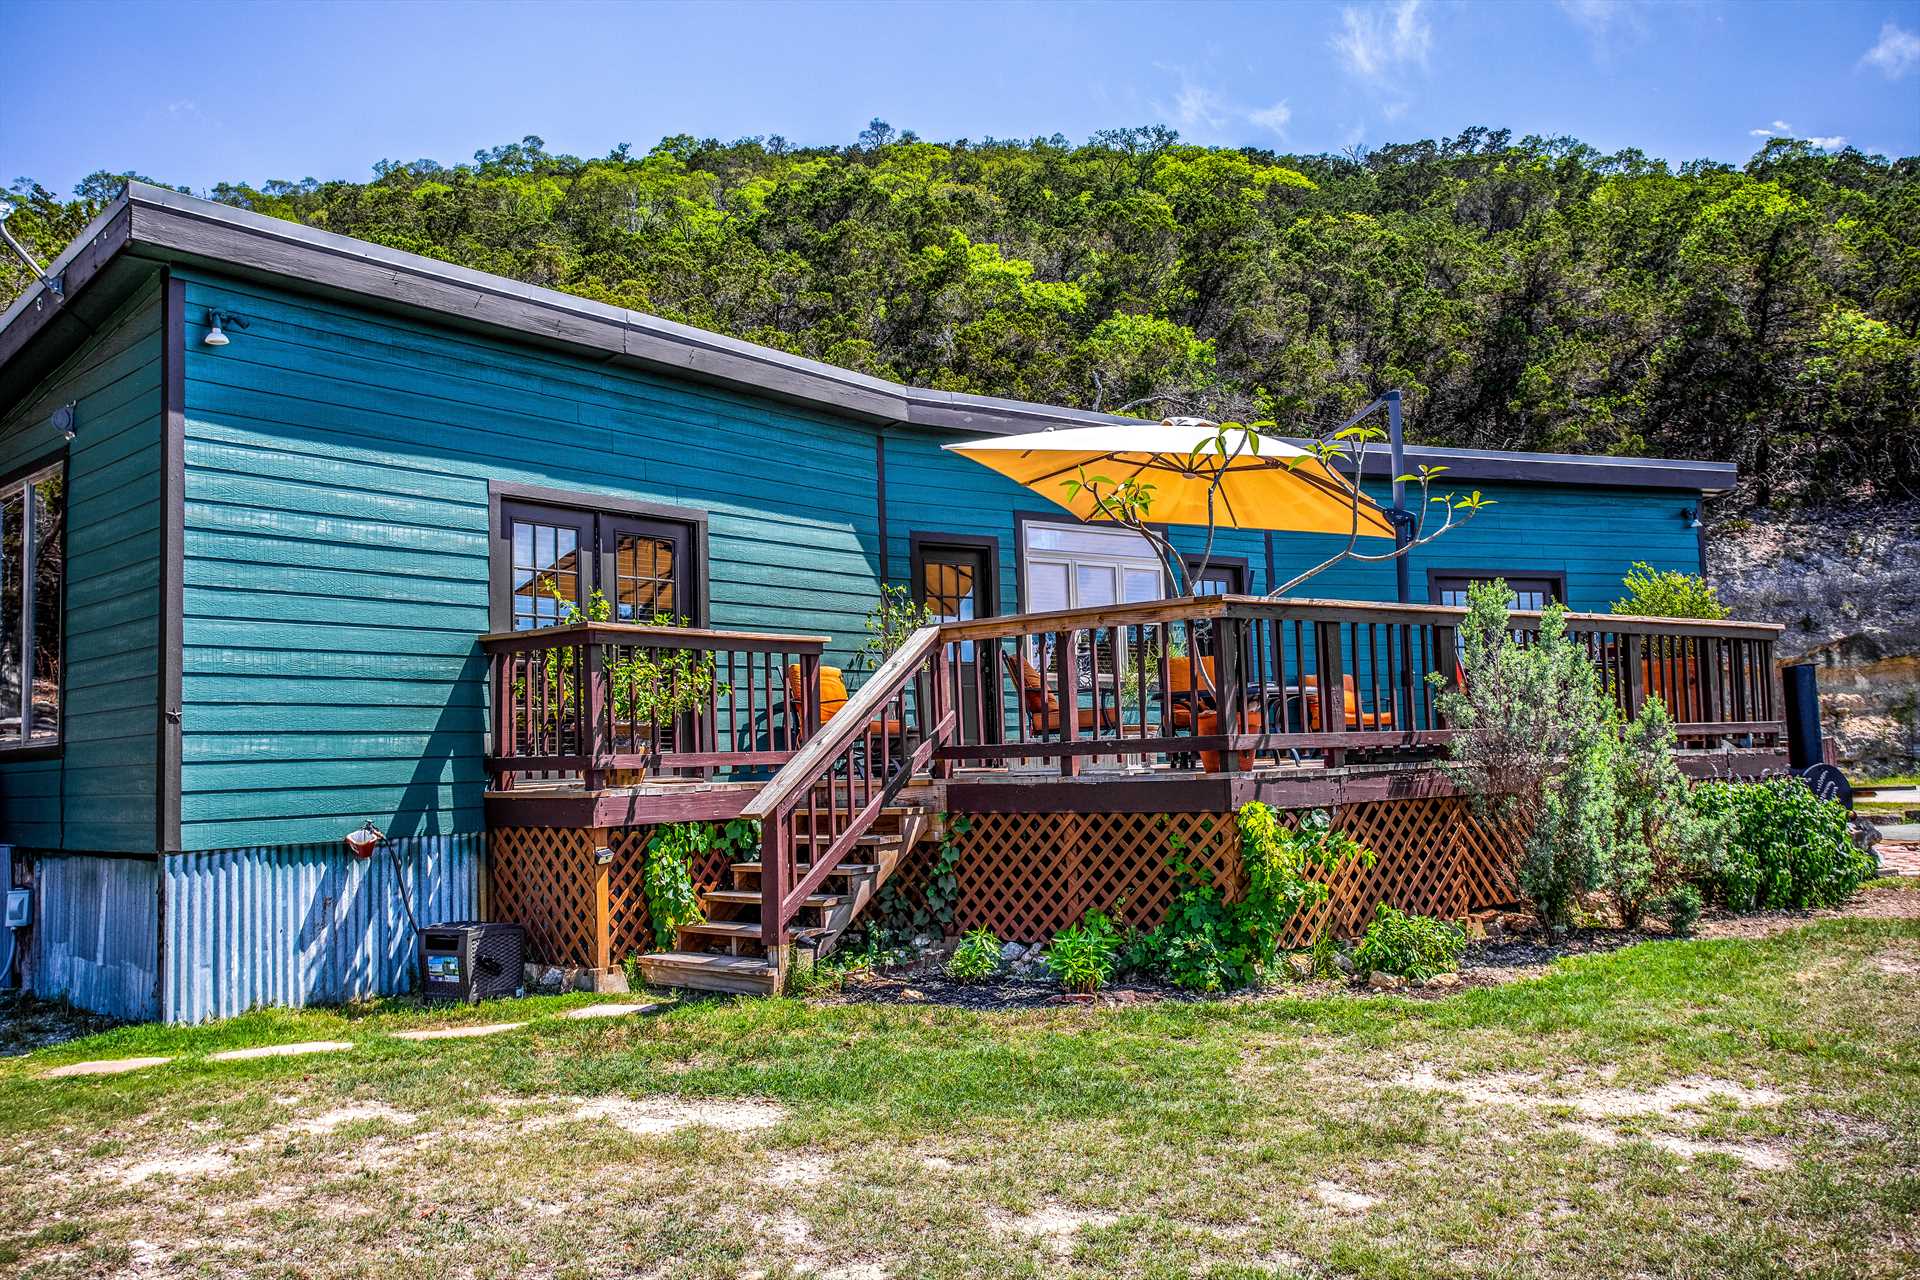                                                 A splash of color in the beautiful Hill Country! Make this picturesque and peaceful getaway cabin your home away from home.